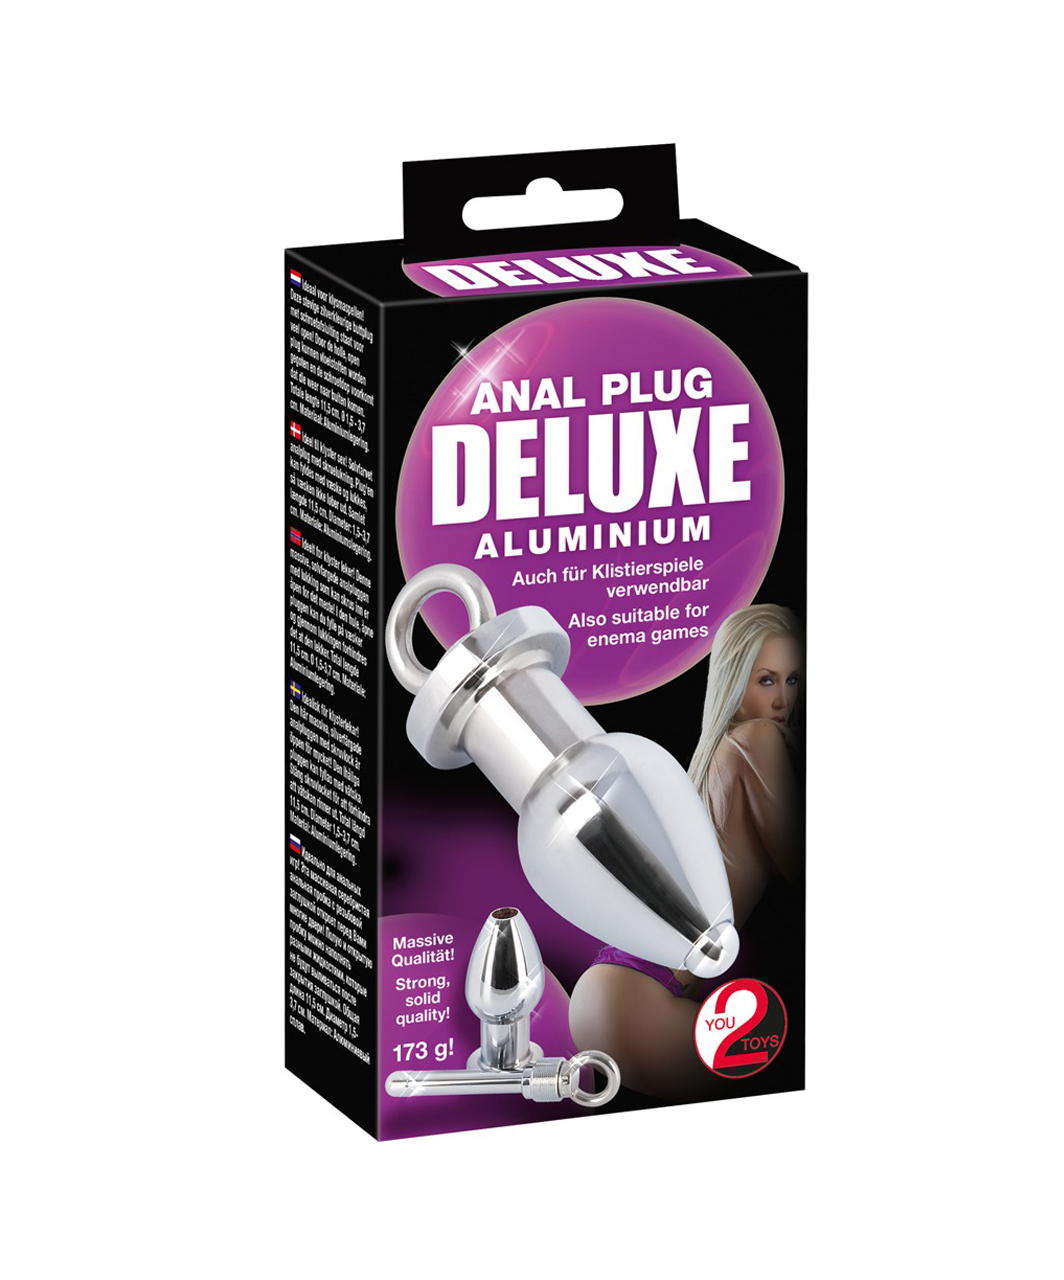 You2Toys Anal Plug Deluxe